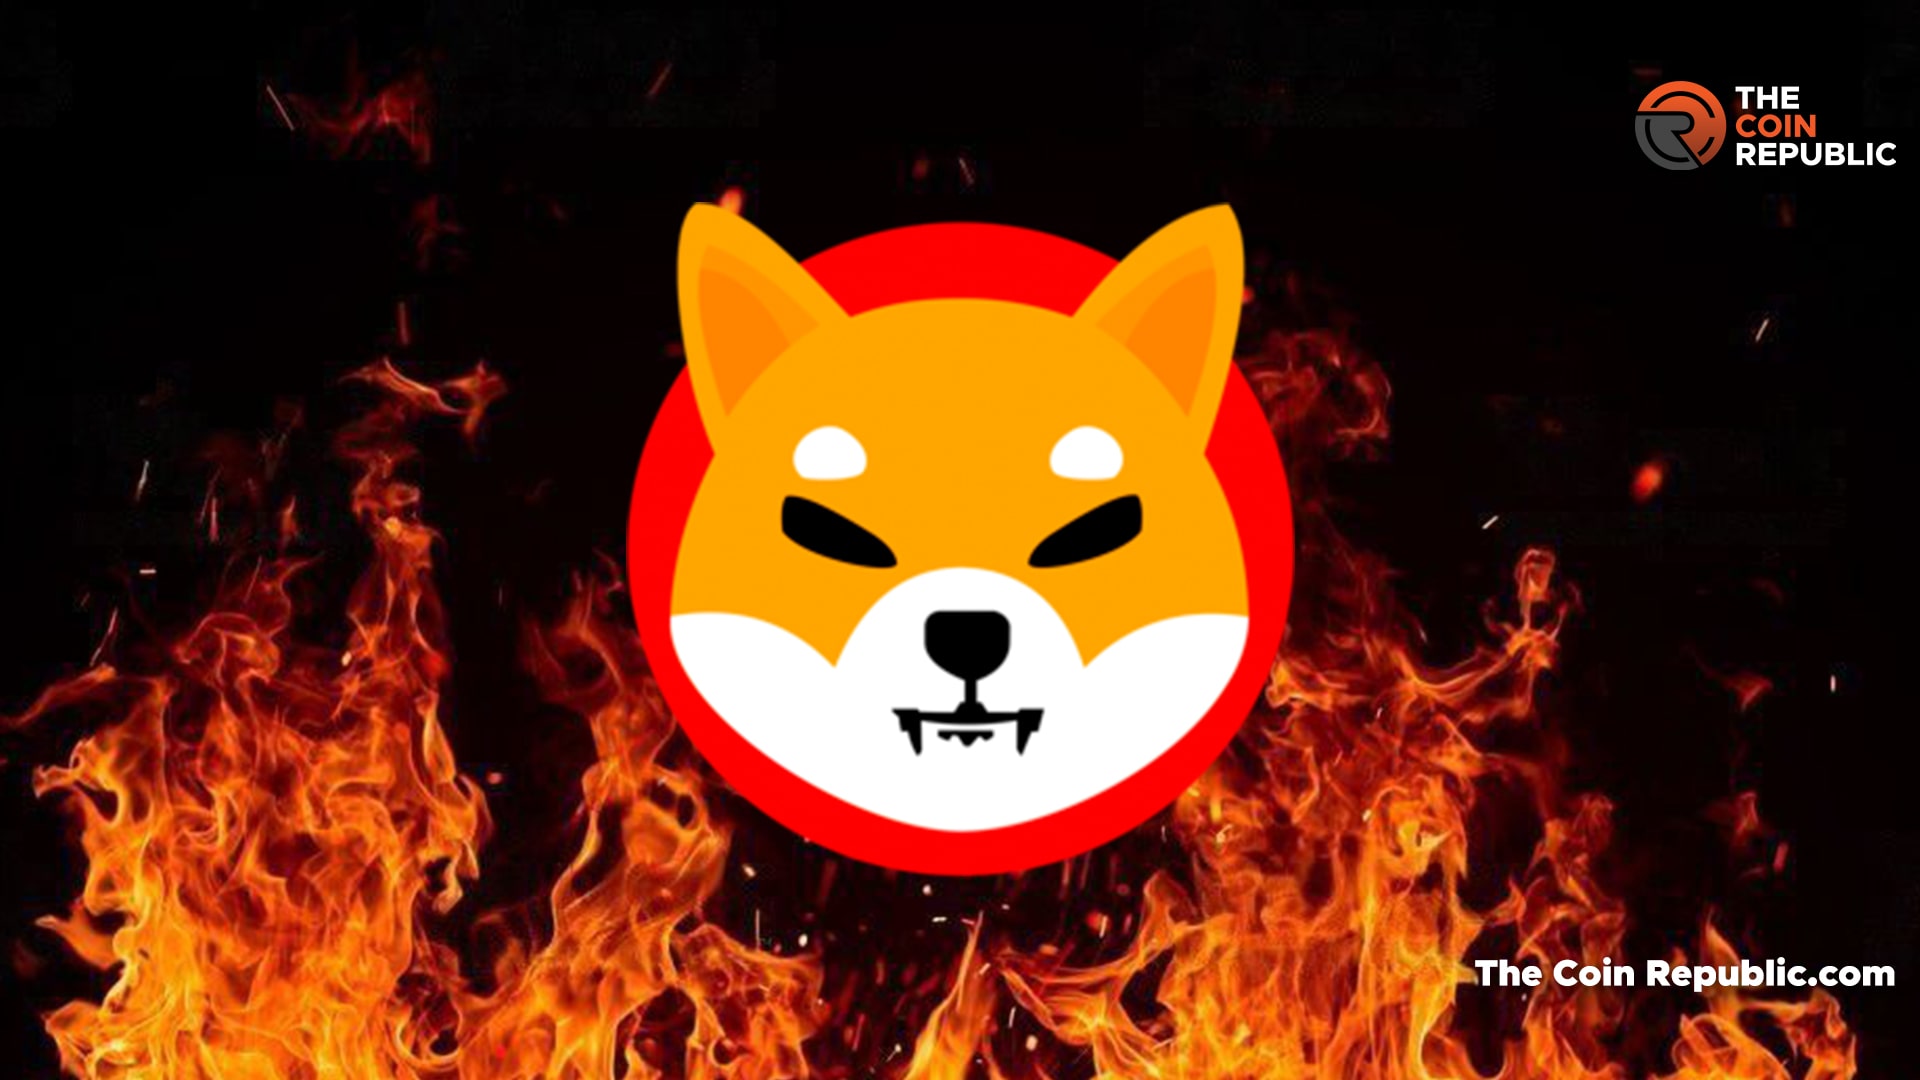 Shiba Inu Burn Rate Climbs 500% After Buy Orders Touches 91%. - The ...